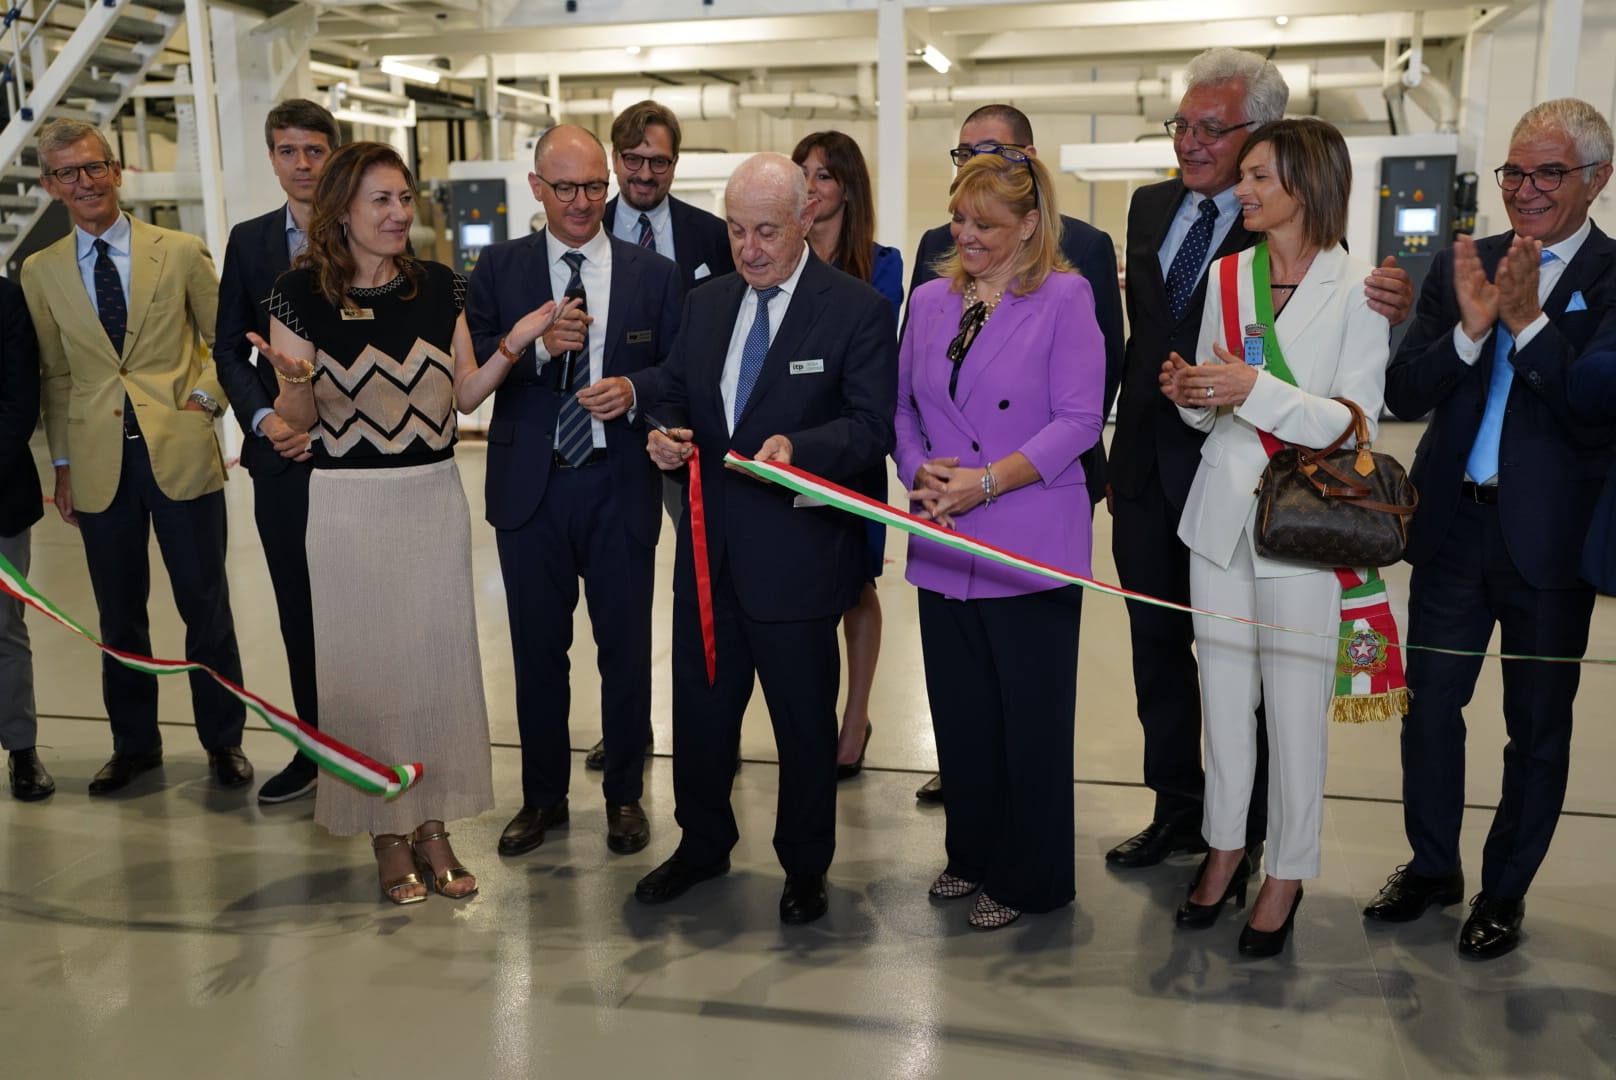 Ribbon cutting of the new ITP co-extruded and sustainable plastic film production plant